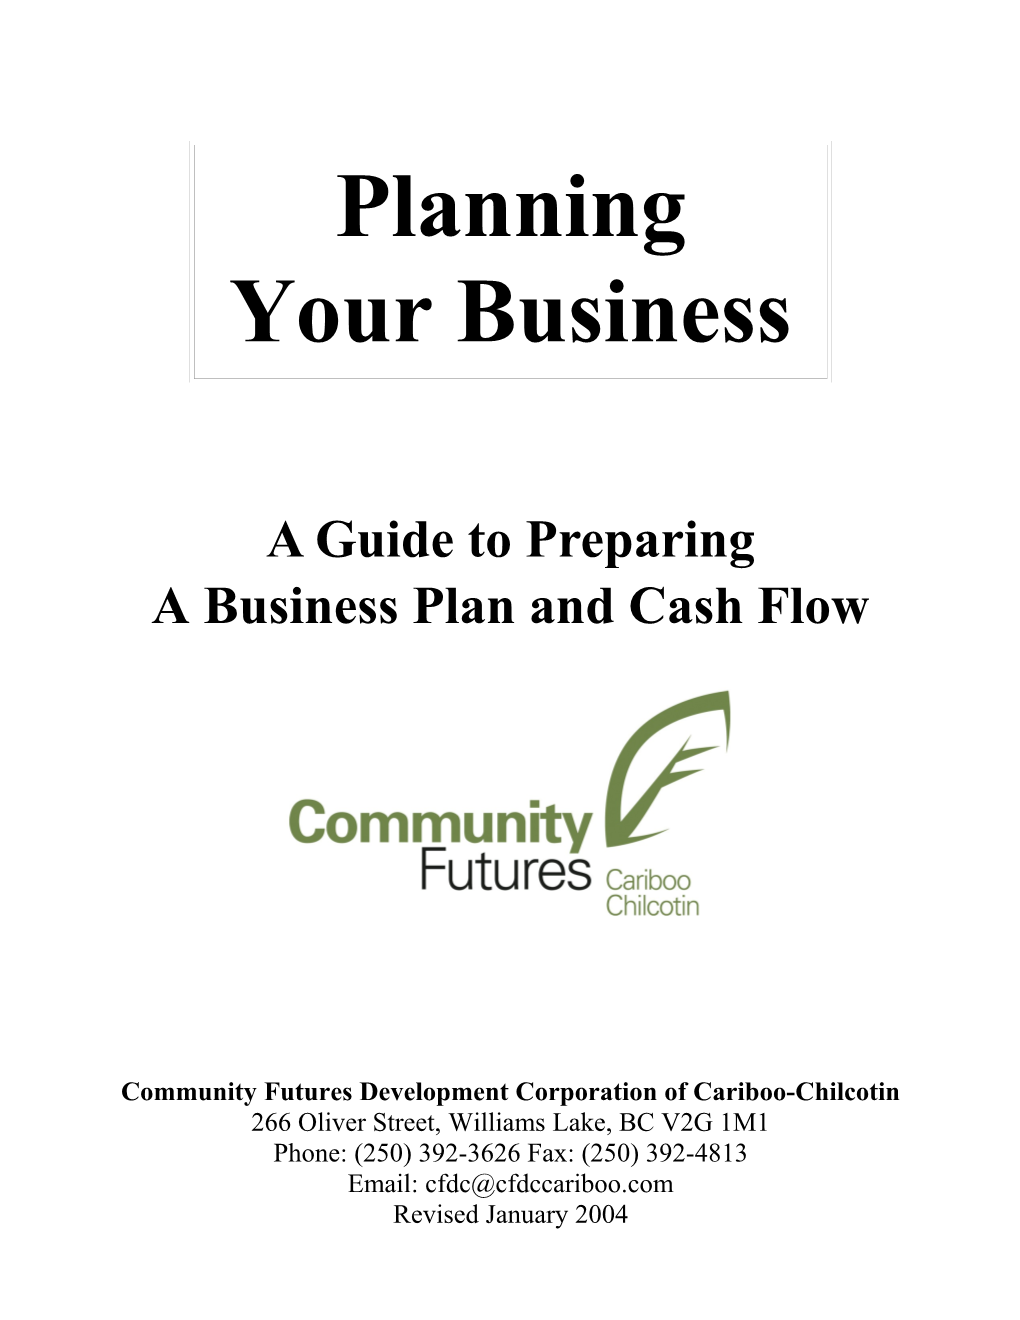 A Business Plan and Cash Flow